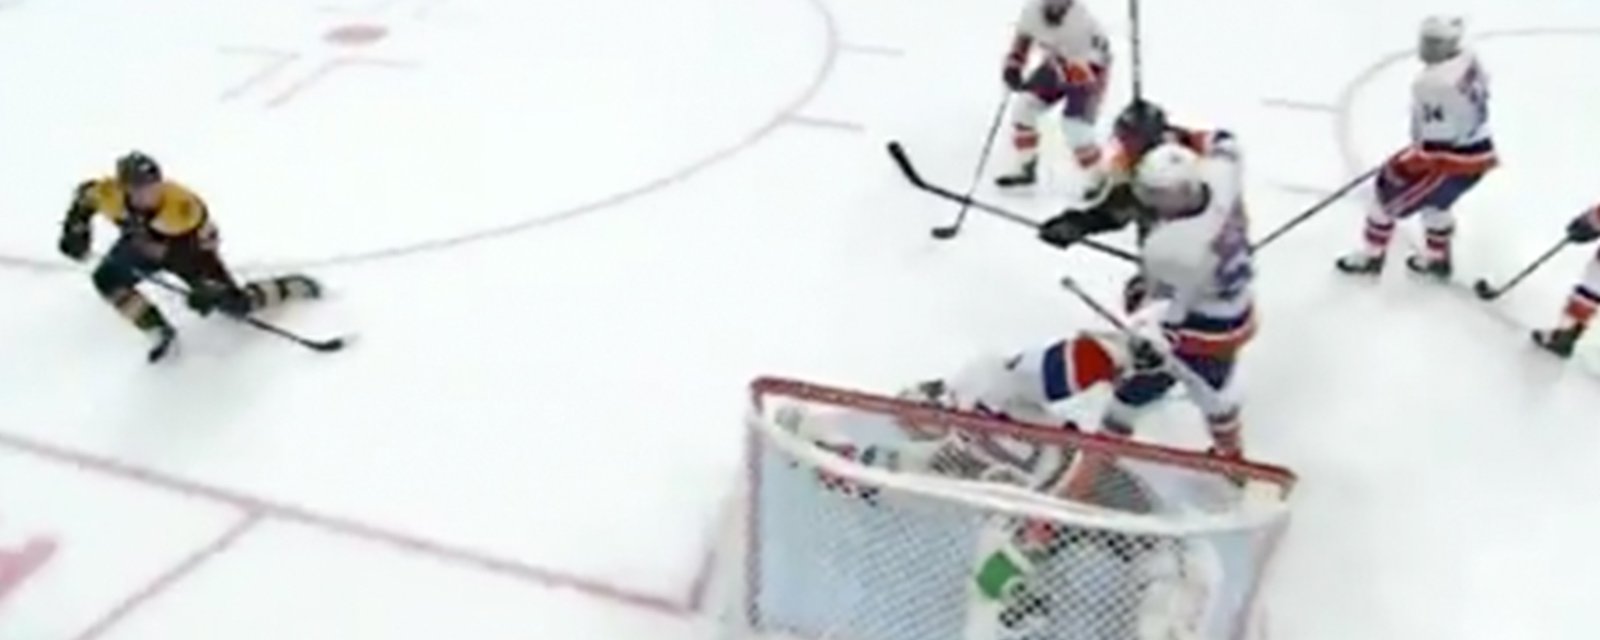 Varlamov makes the save of the year on Anders Bjork